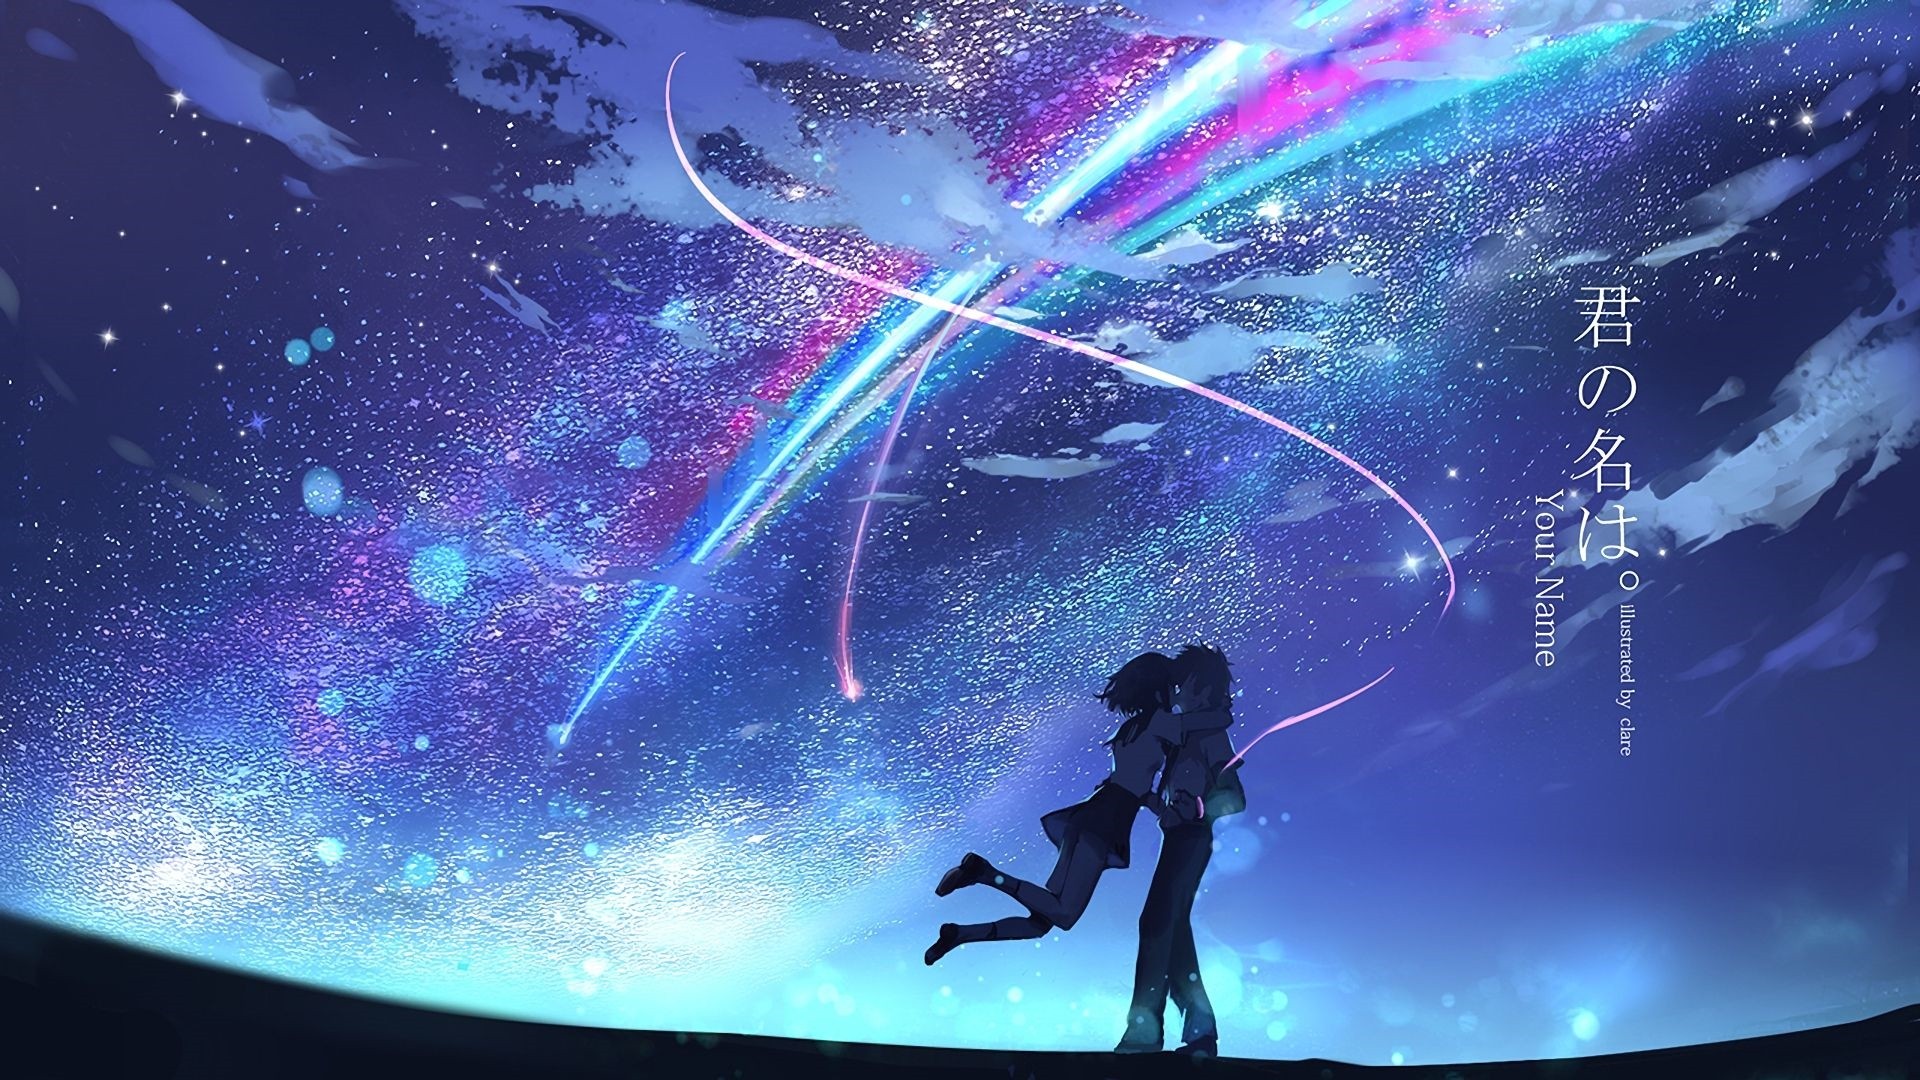 Your Name PC Wallpaper HD